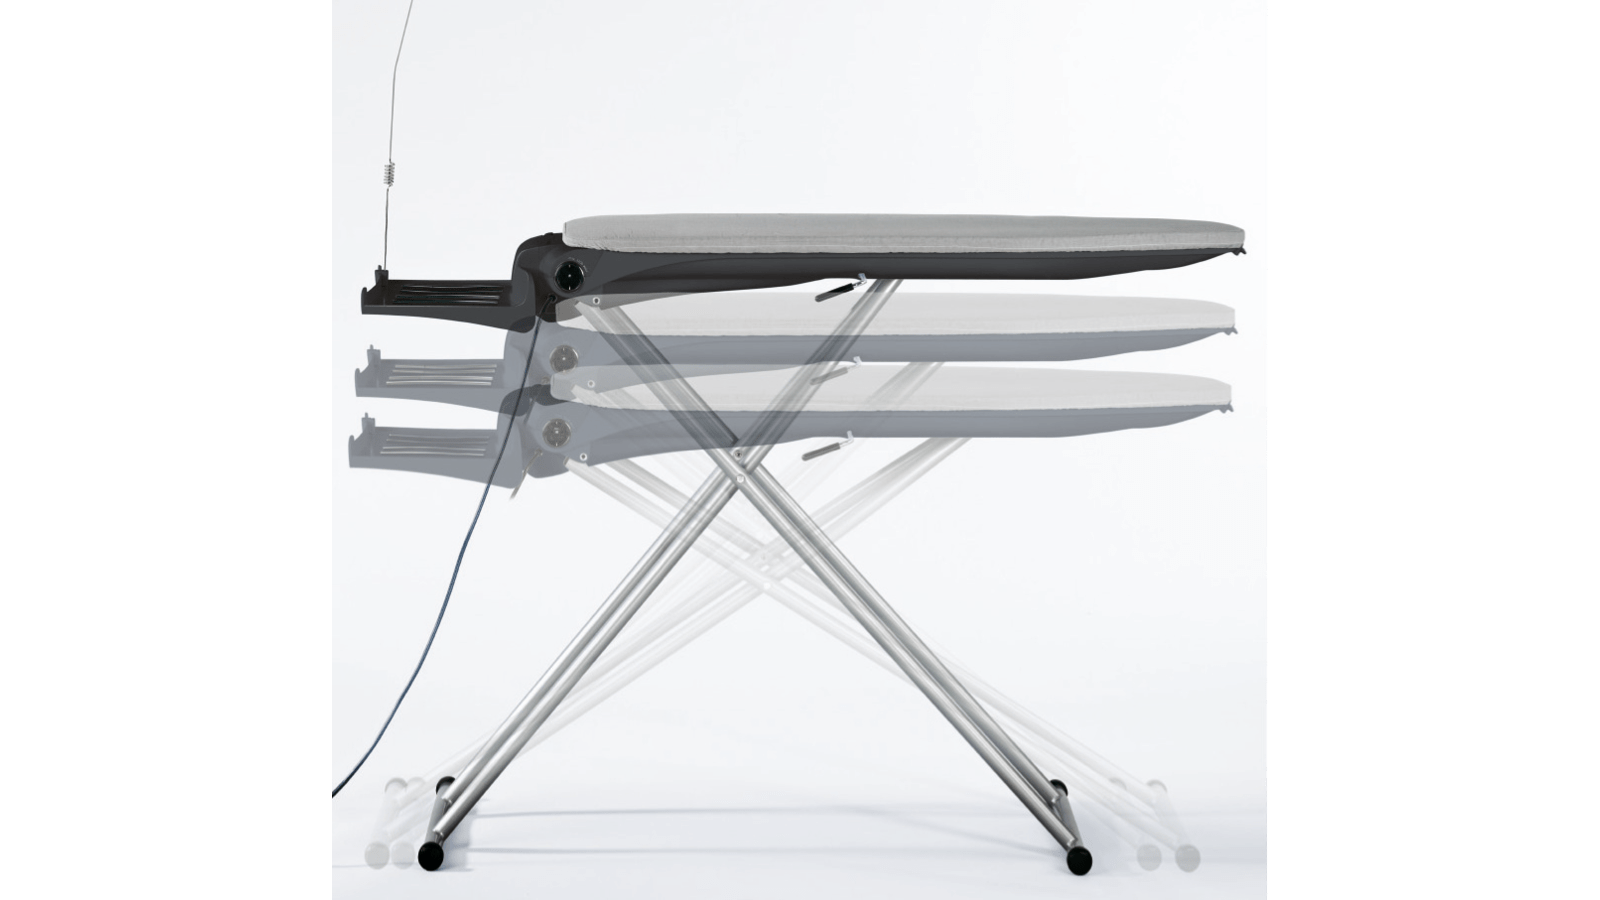 For quick and gentle ironing: Ironing board with extraction and blower func...